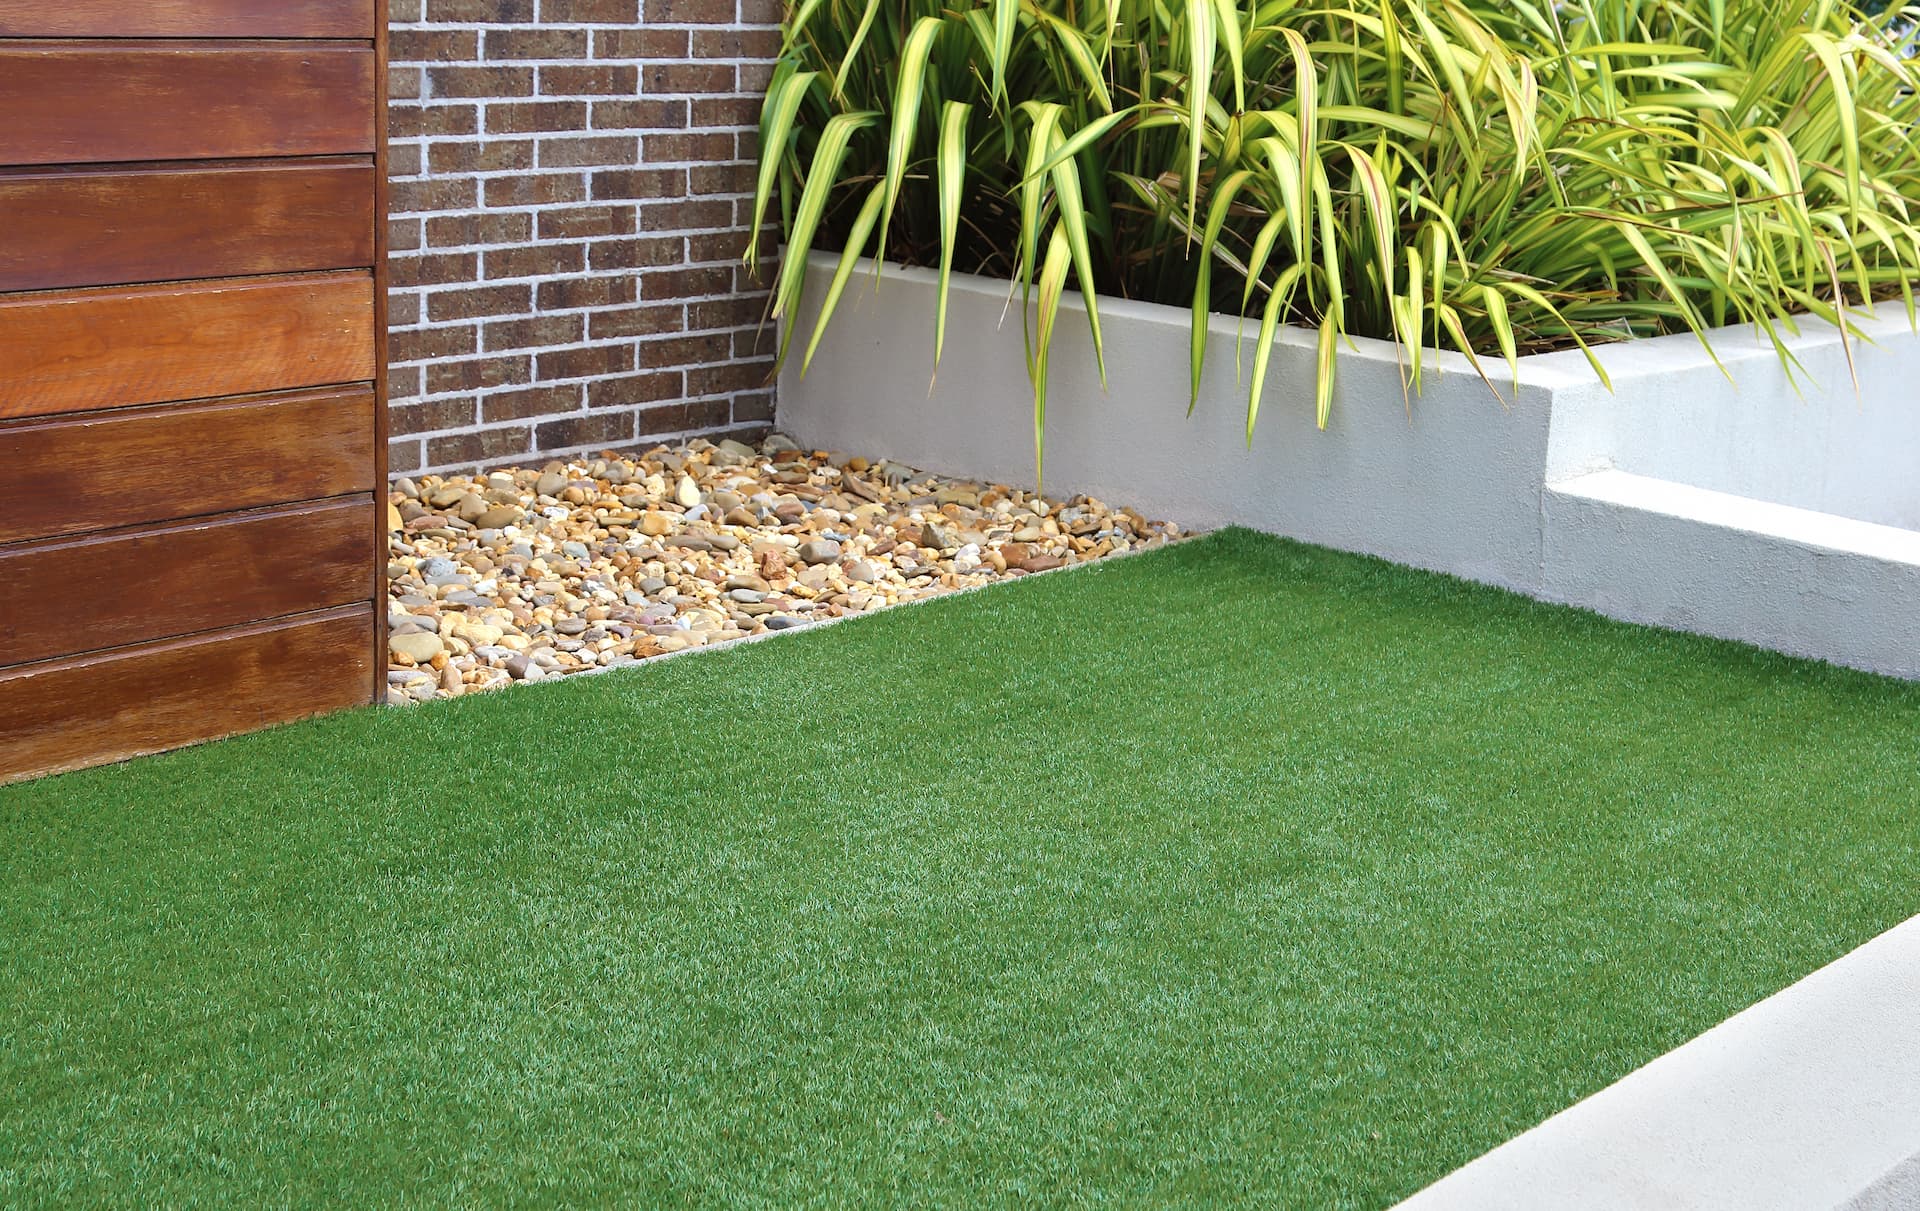 Licenced Artificial Grass & Turf services in Hazel Grove